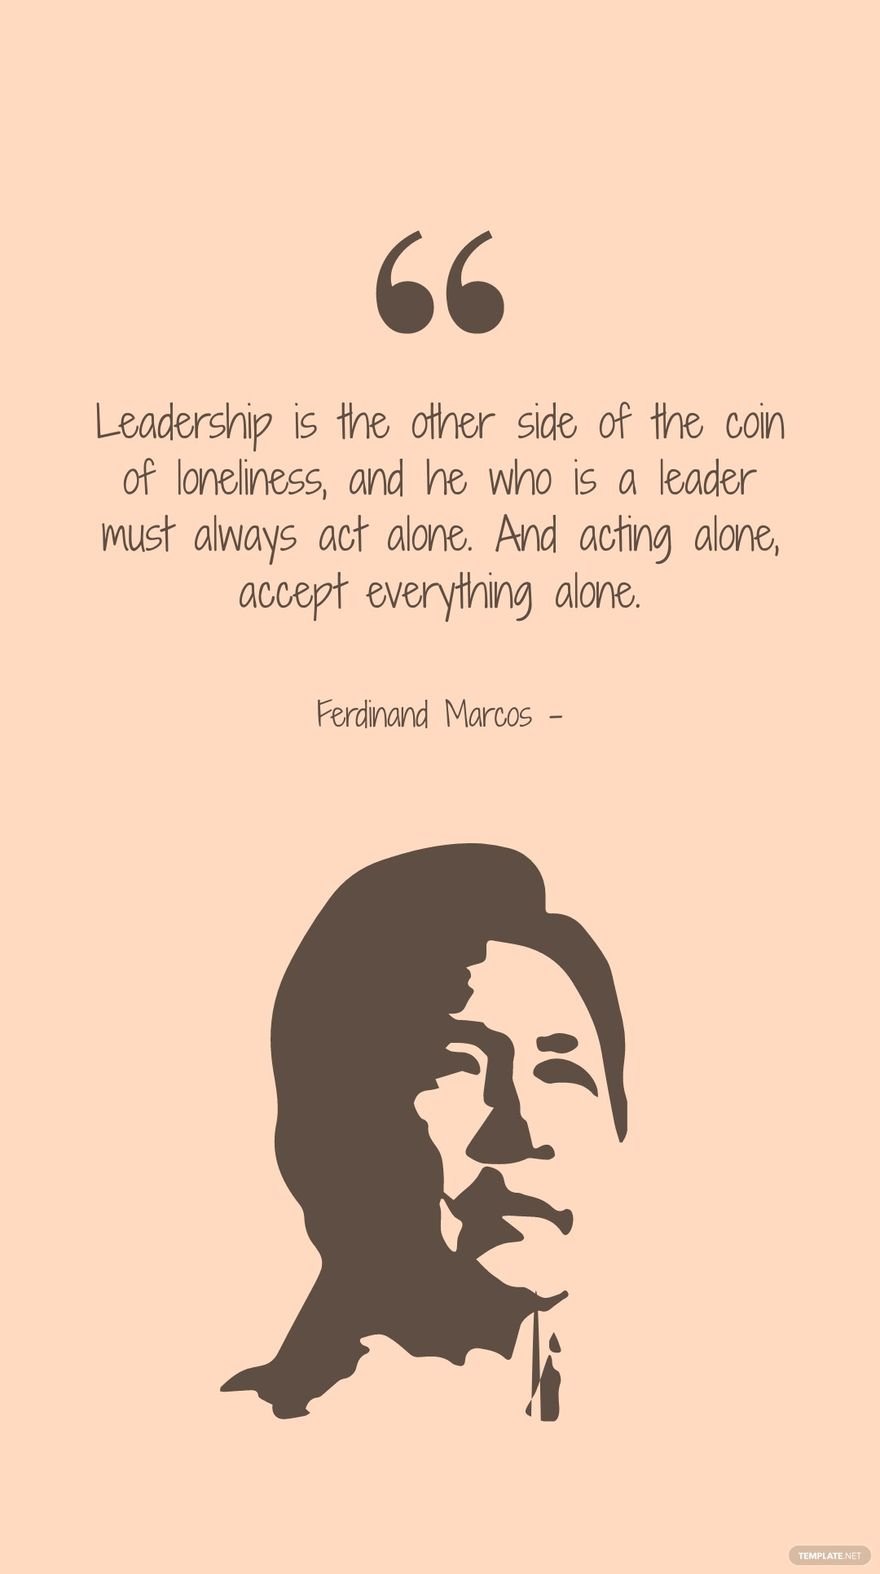 Free Ferdinand Marcos - Leadership is the other side of the coin of loneliness, and he who is a leader must always act alone. And acting alone, accept everything alone. in JPG